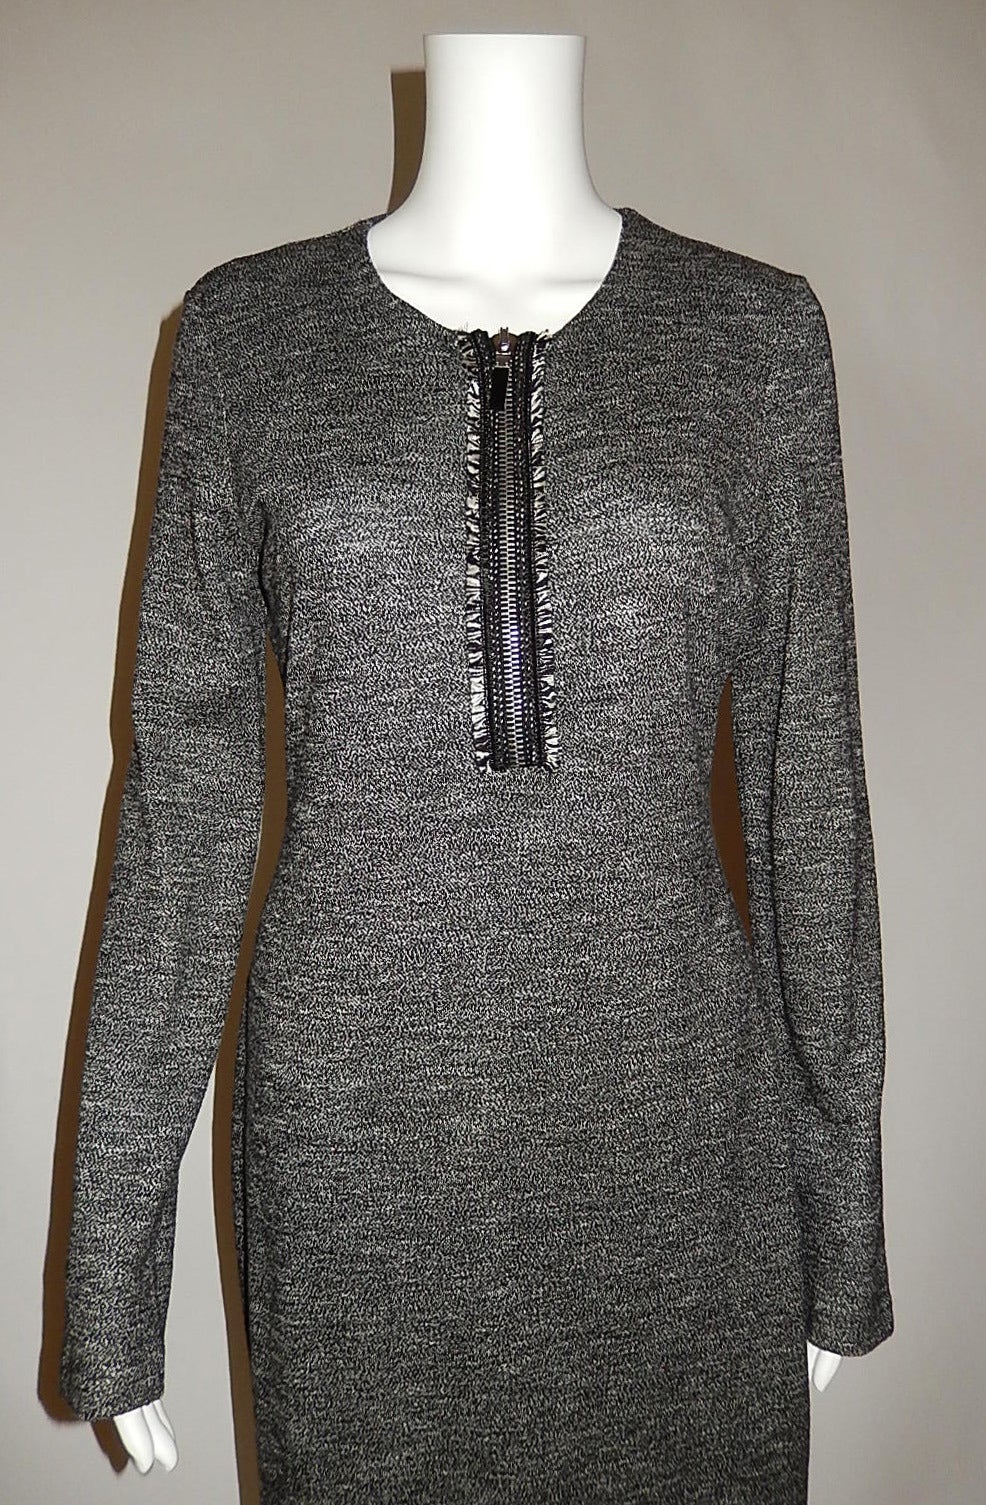 Alexander McQueen FW 2011 Black/White Wool Blend Sheath Dress, It 44/8 In Excellent Condition For Sale In New York, NY